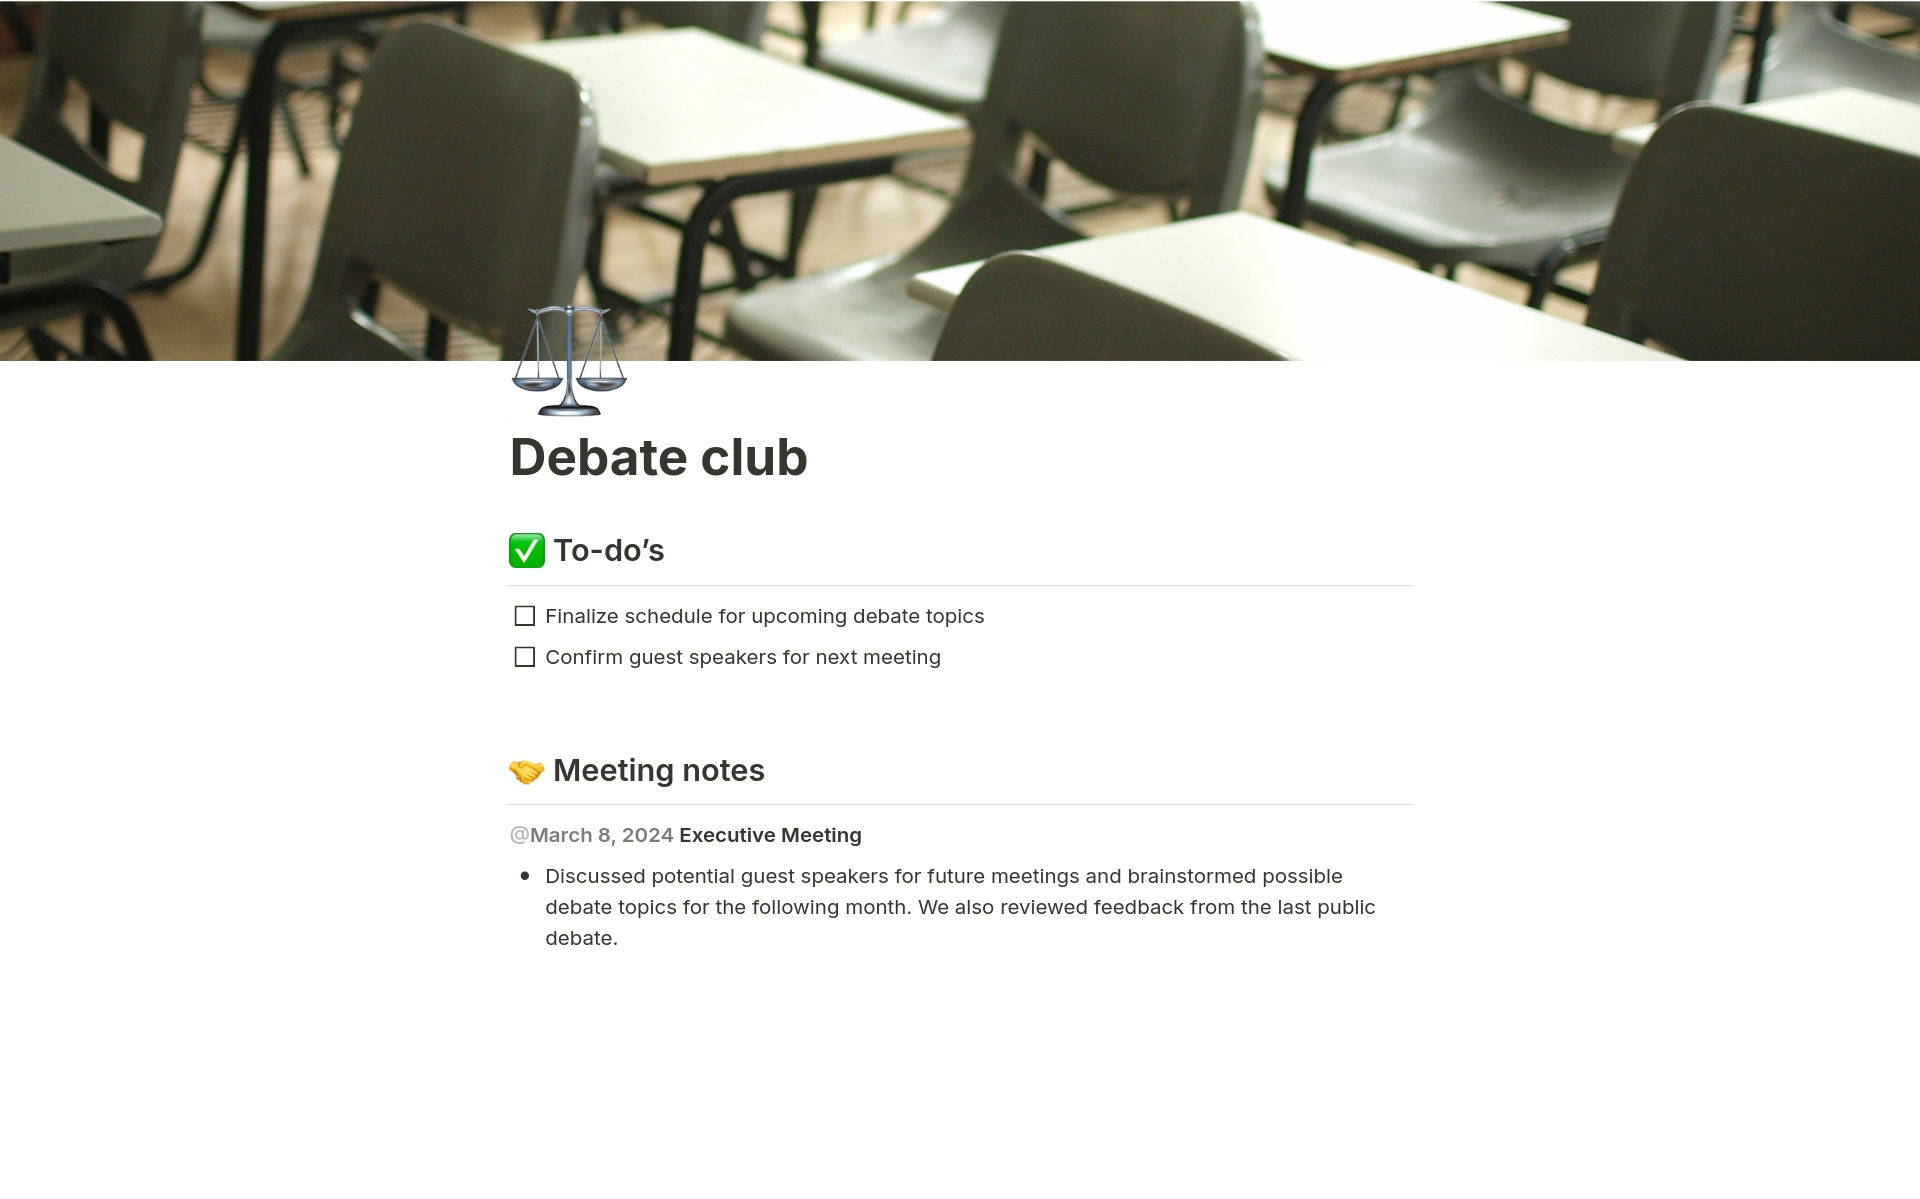 Use this template to effortlessly organize your academic schedule, from classes to assignment deadlines, and coordinate all your club meetings. It's designed to keep everything in order, helping you focus and stay motivated throughout the school year.